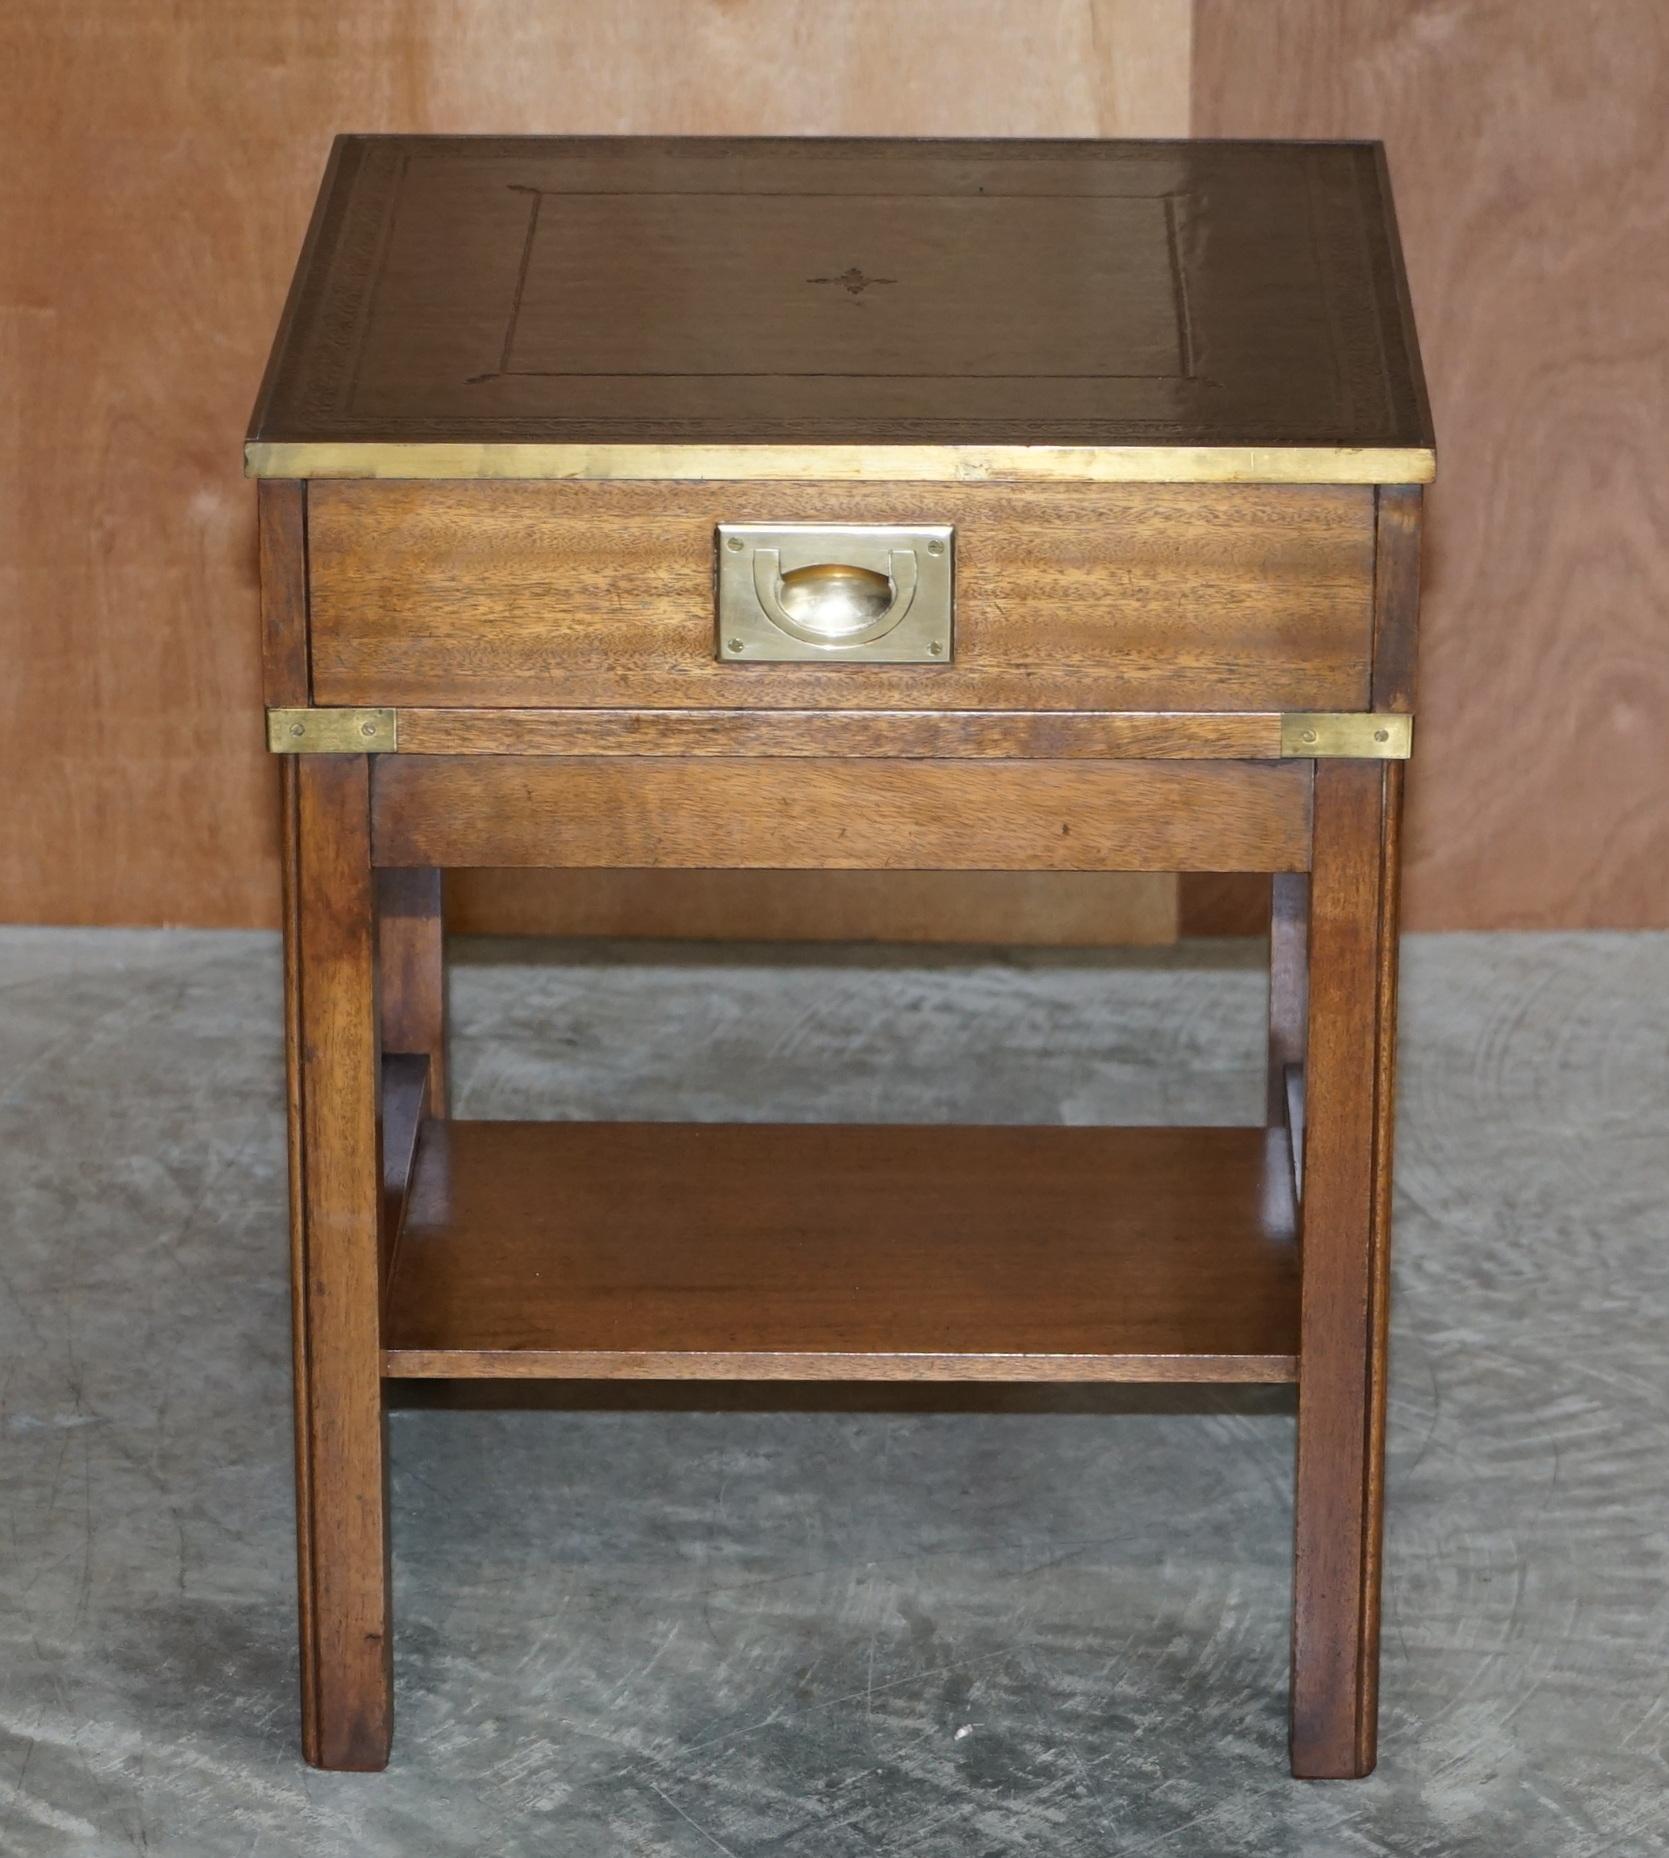 We are delighted to offer for sale this lovely vintage mahogany with green leather and brass trim military campaign side table

A very good looking and well made piece. Made in the always popular military campaign style, the frame is mahogany with